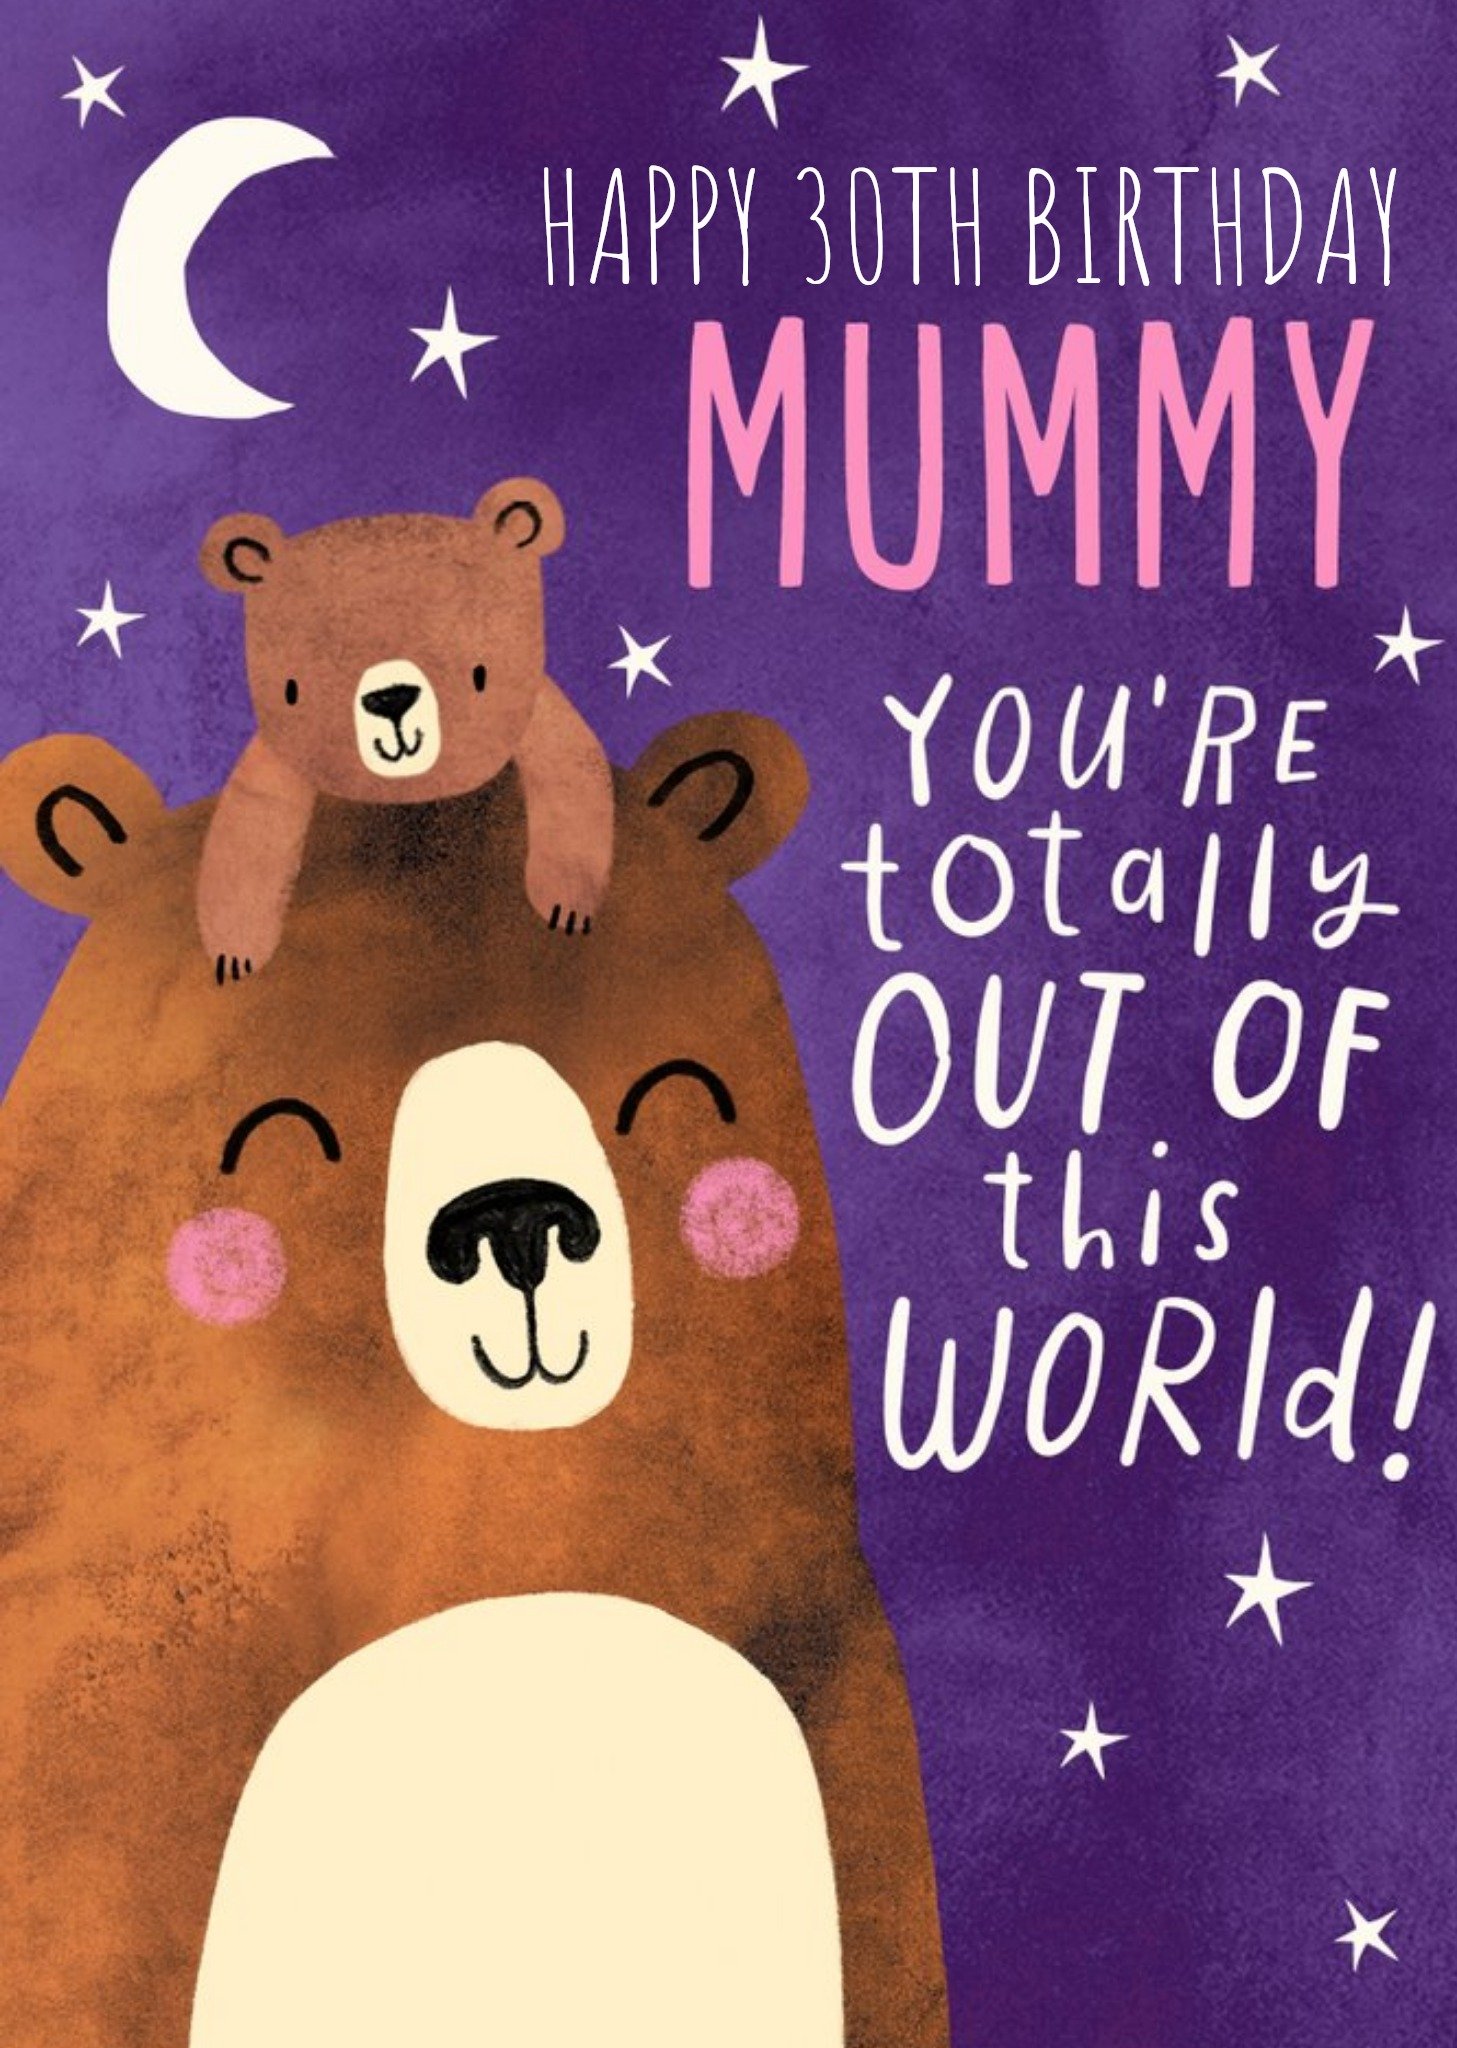 Moonpig Pigment Illustration Mummy You're Out Of This World Birthday Card, Large